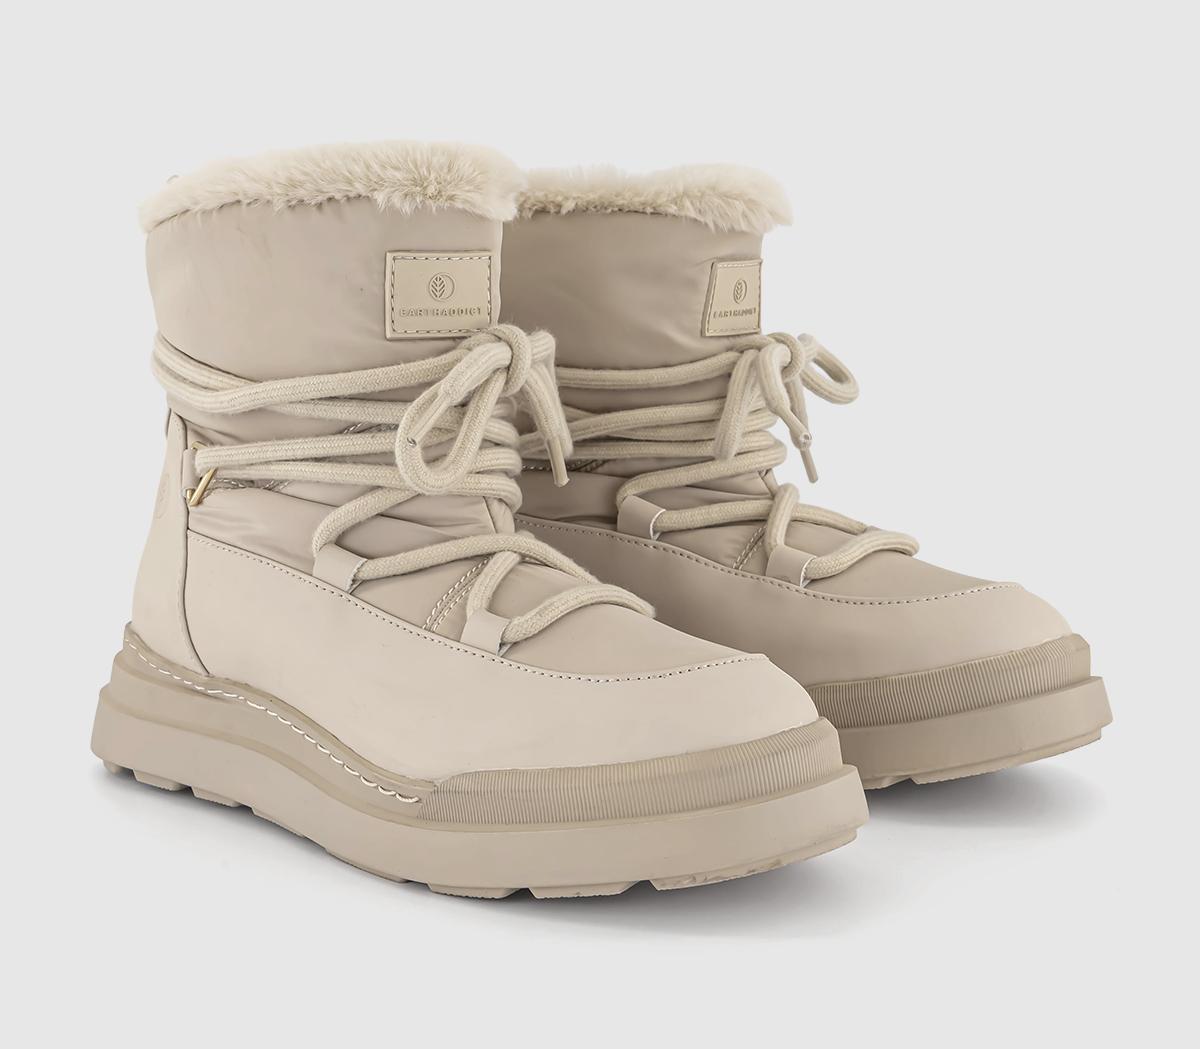 Earthaddict Womens Earth Addict: Eira Warm Lined Snow Boots Beige Natural, 4